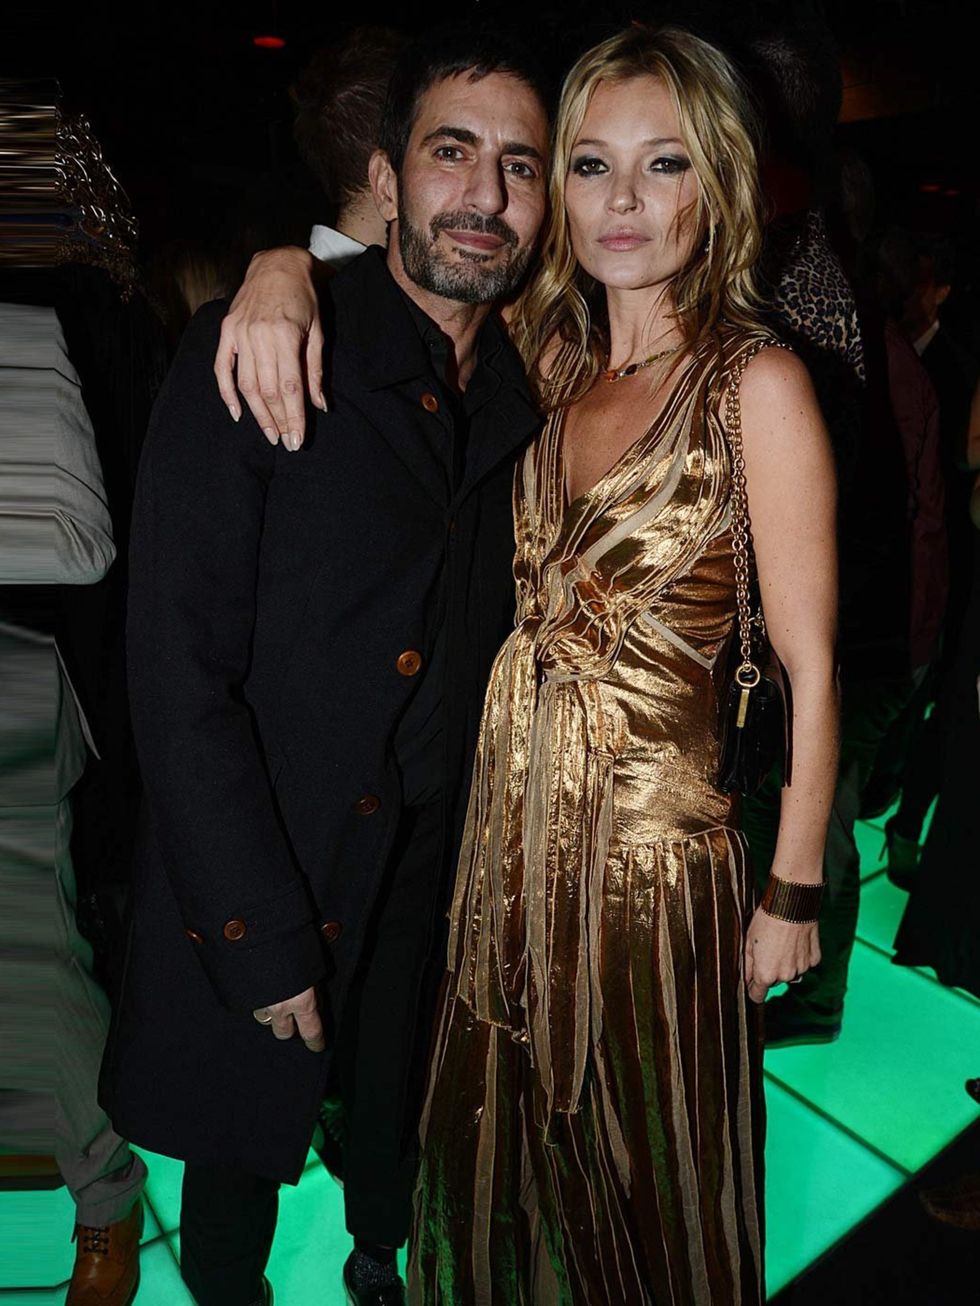 <p>Marc Jacobs and Kate Moss, in a gold Marc Jacobs dress, at the 'Kate Moss' book launch after party, London.</p>